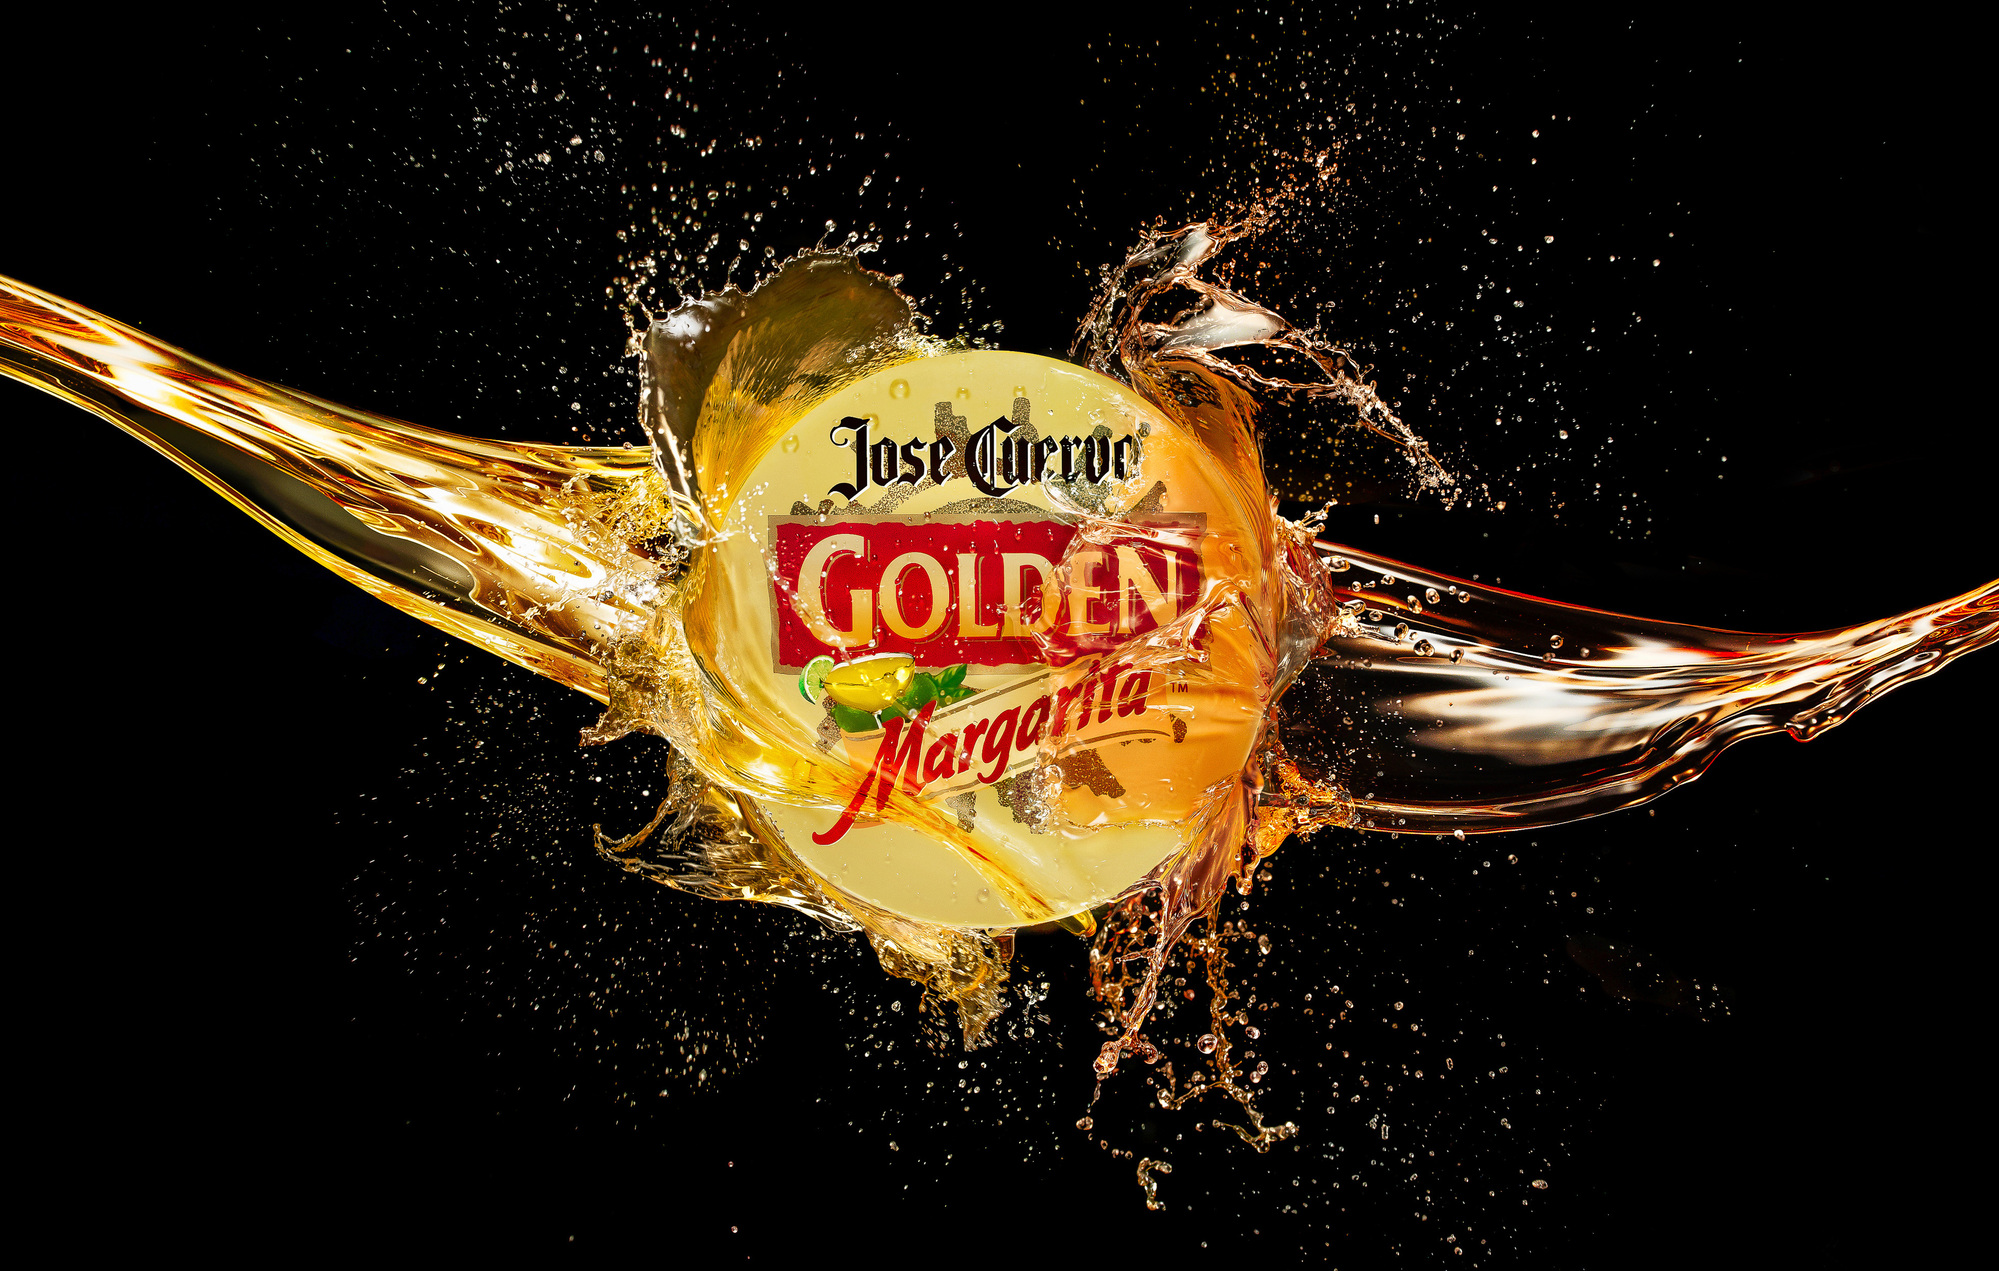 Jose Cuervo Golden Margarita  tequila splash photography by beverage photographer Timothy Hogan. 

Beverages and alcohol product & advertising photography by Timothy Hogan Studio in Los Angeles